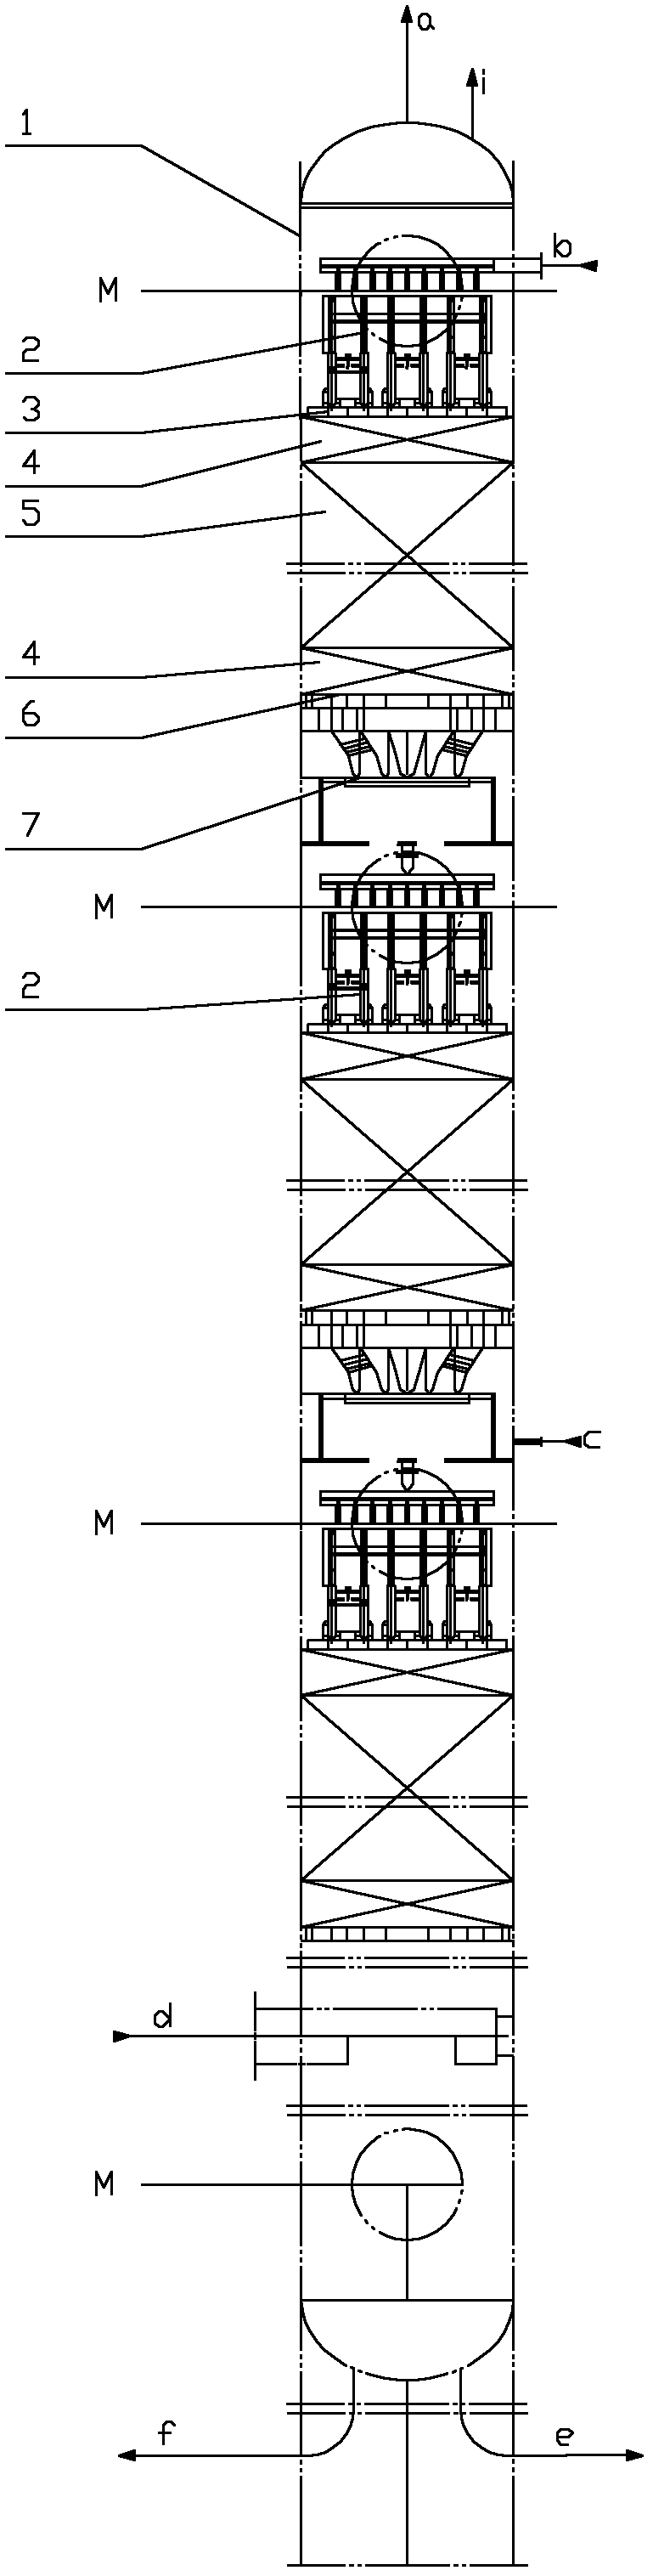 Rectification tower of 1,4-butanediol raffinate recovery system